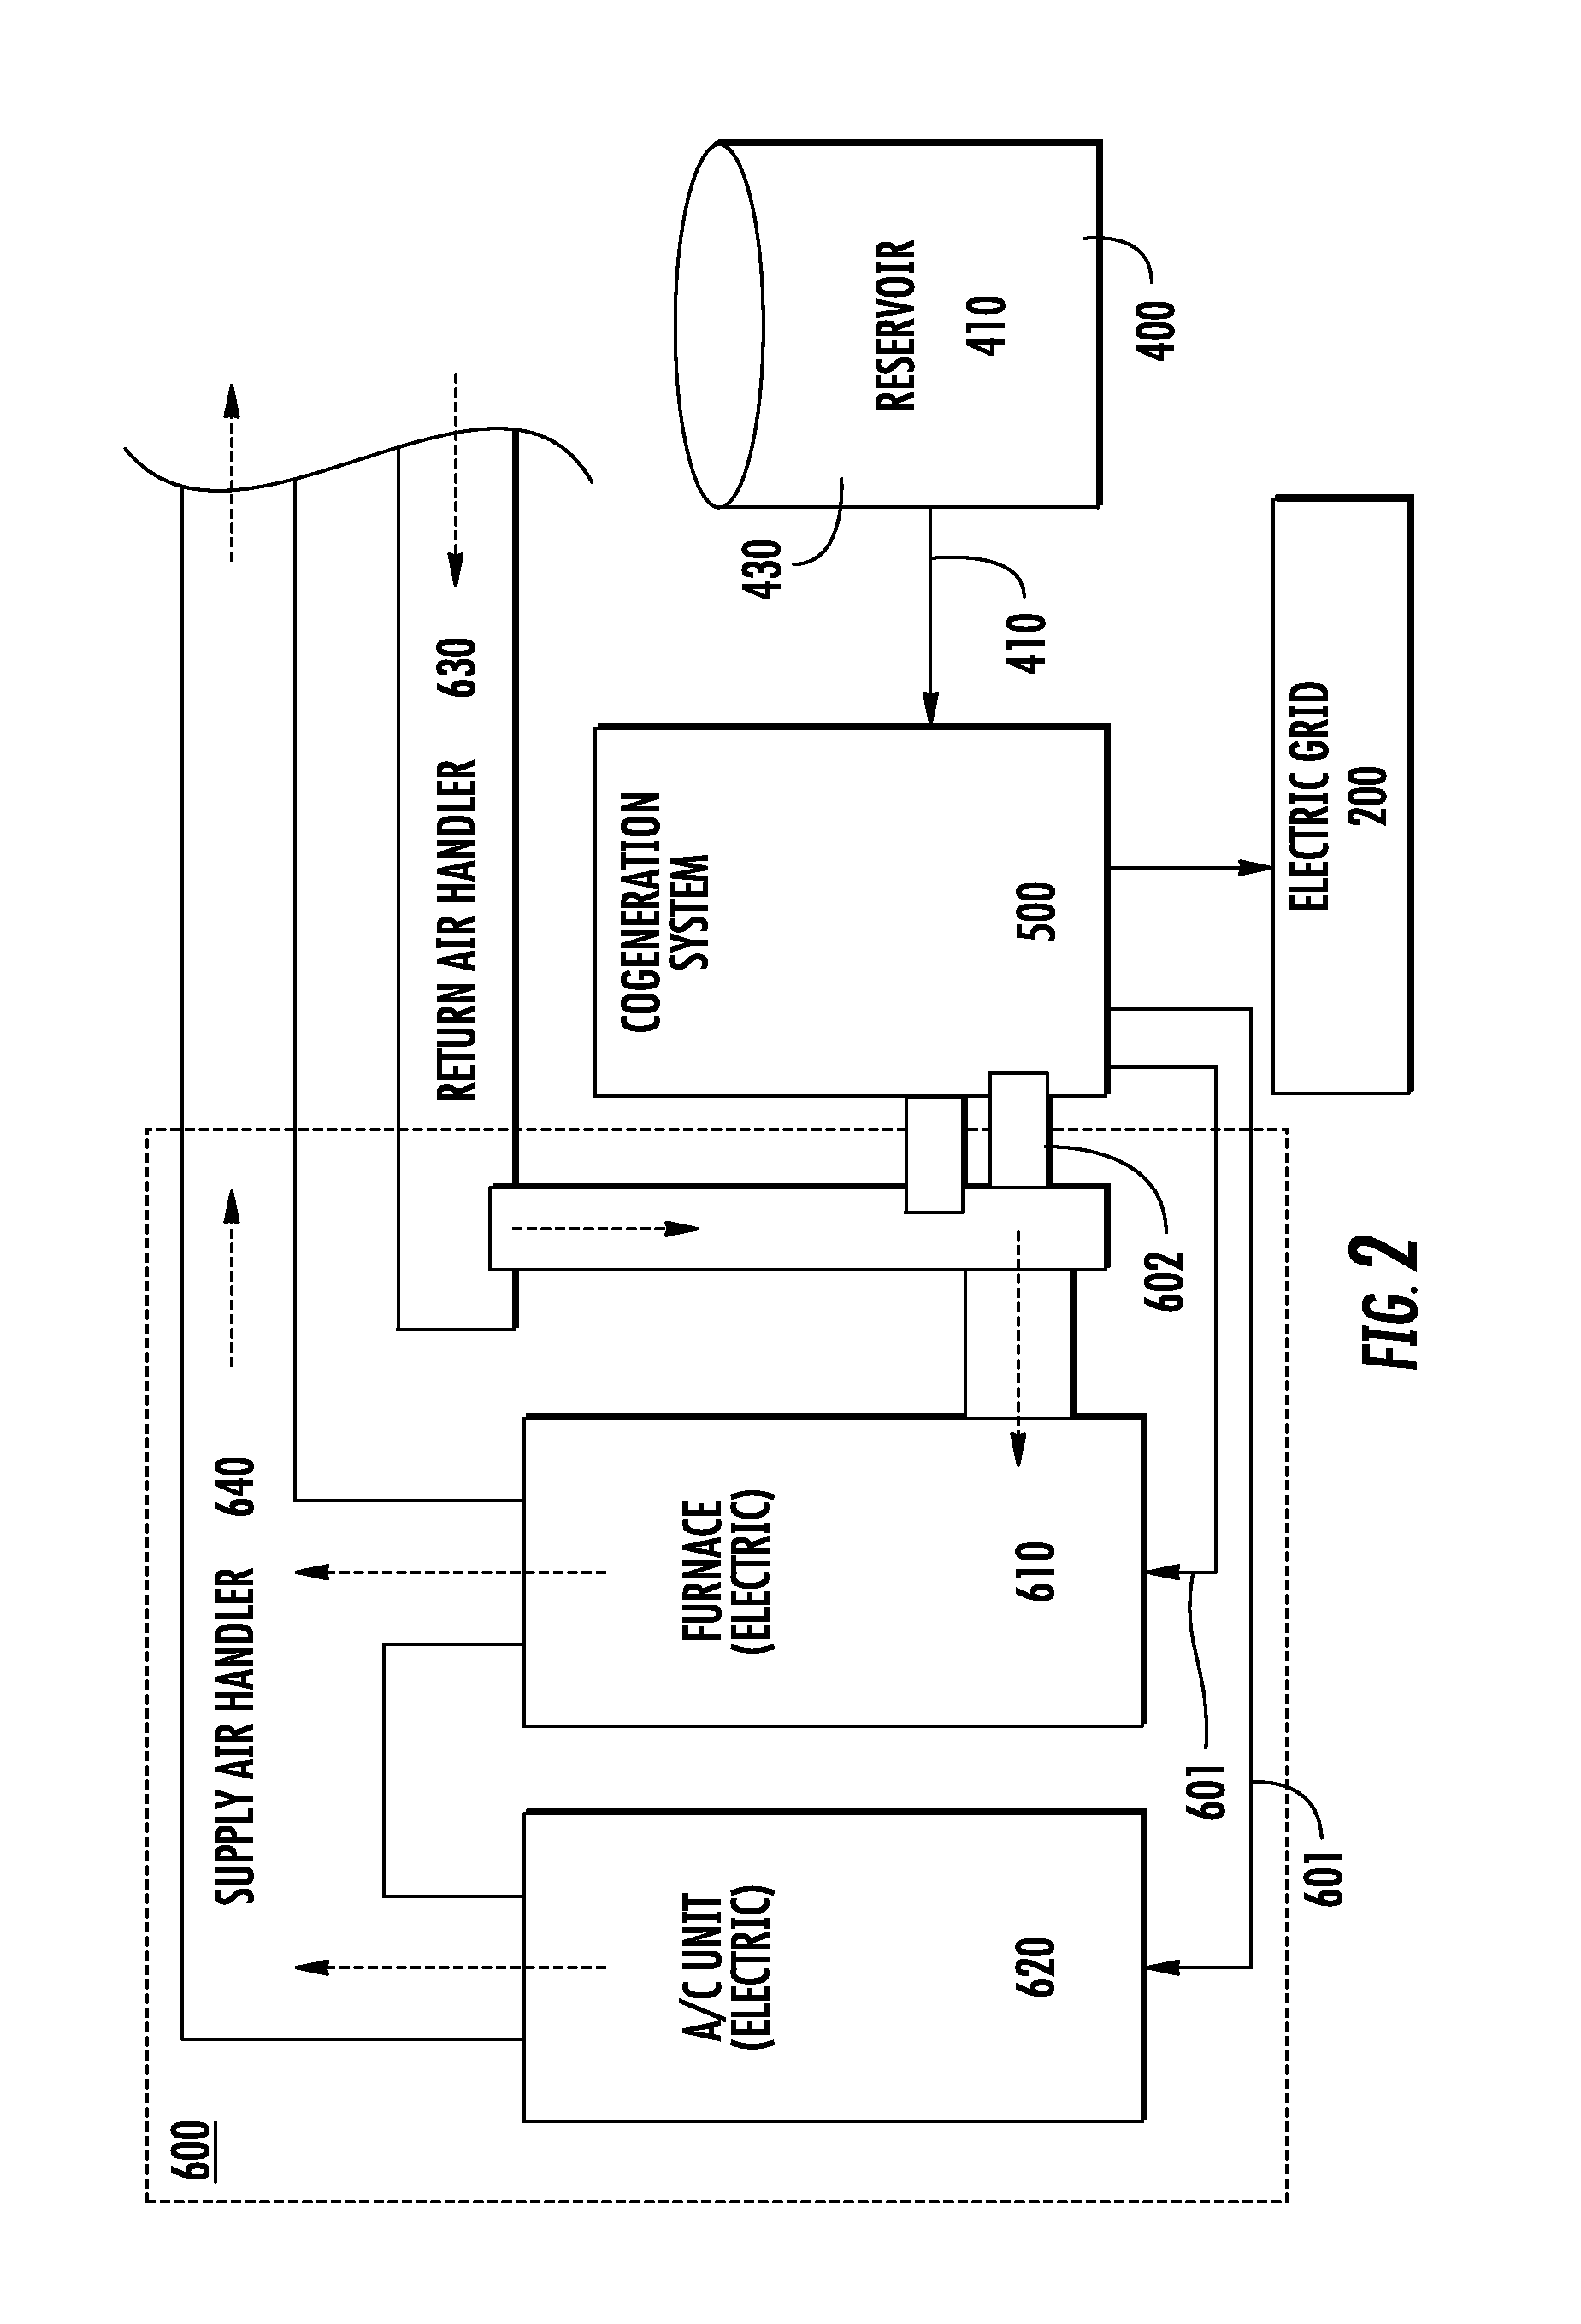 High efficiency cogeneration system and related method of use